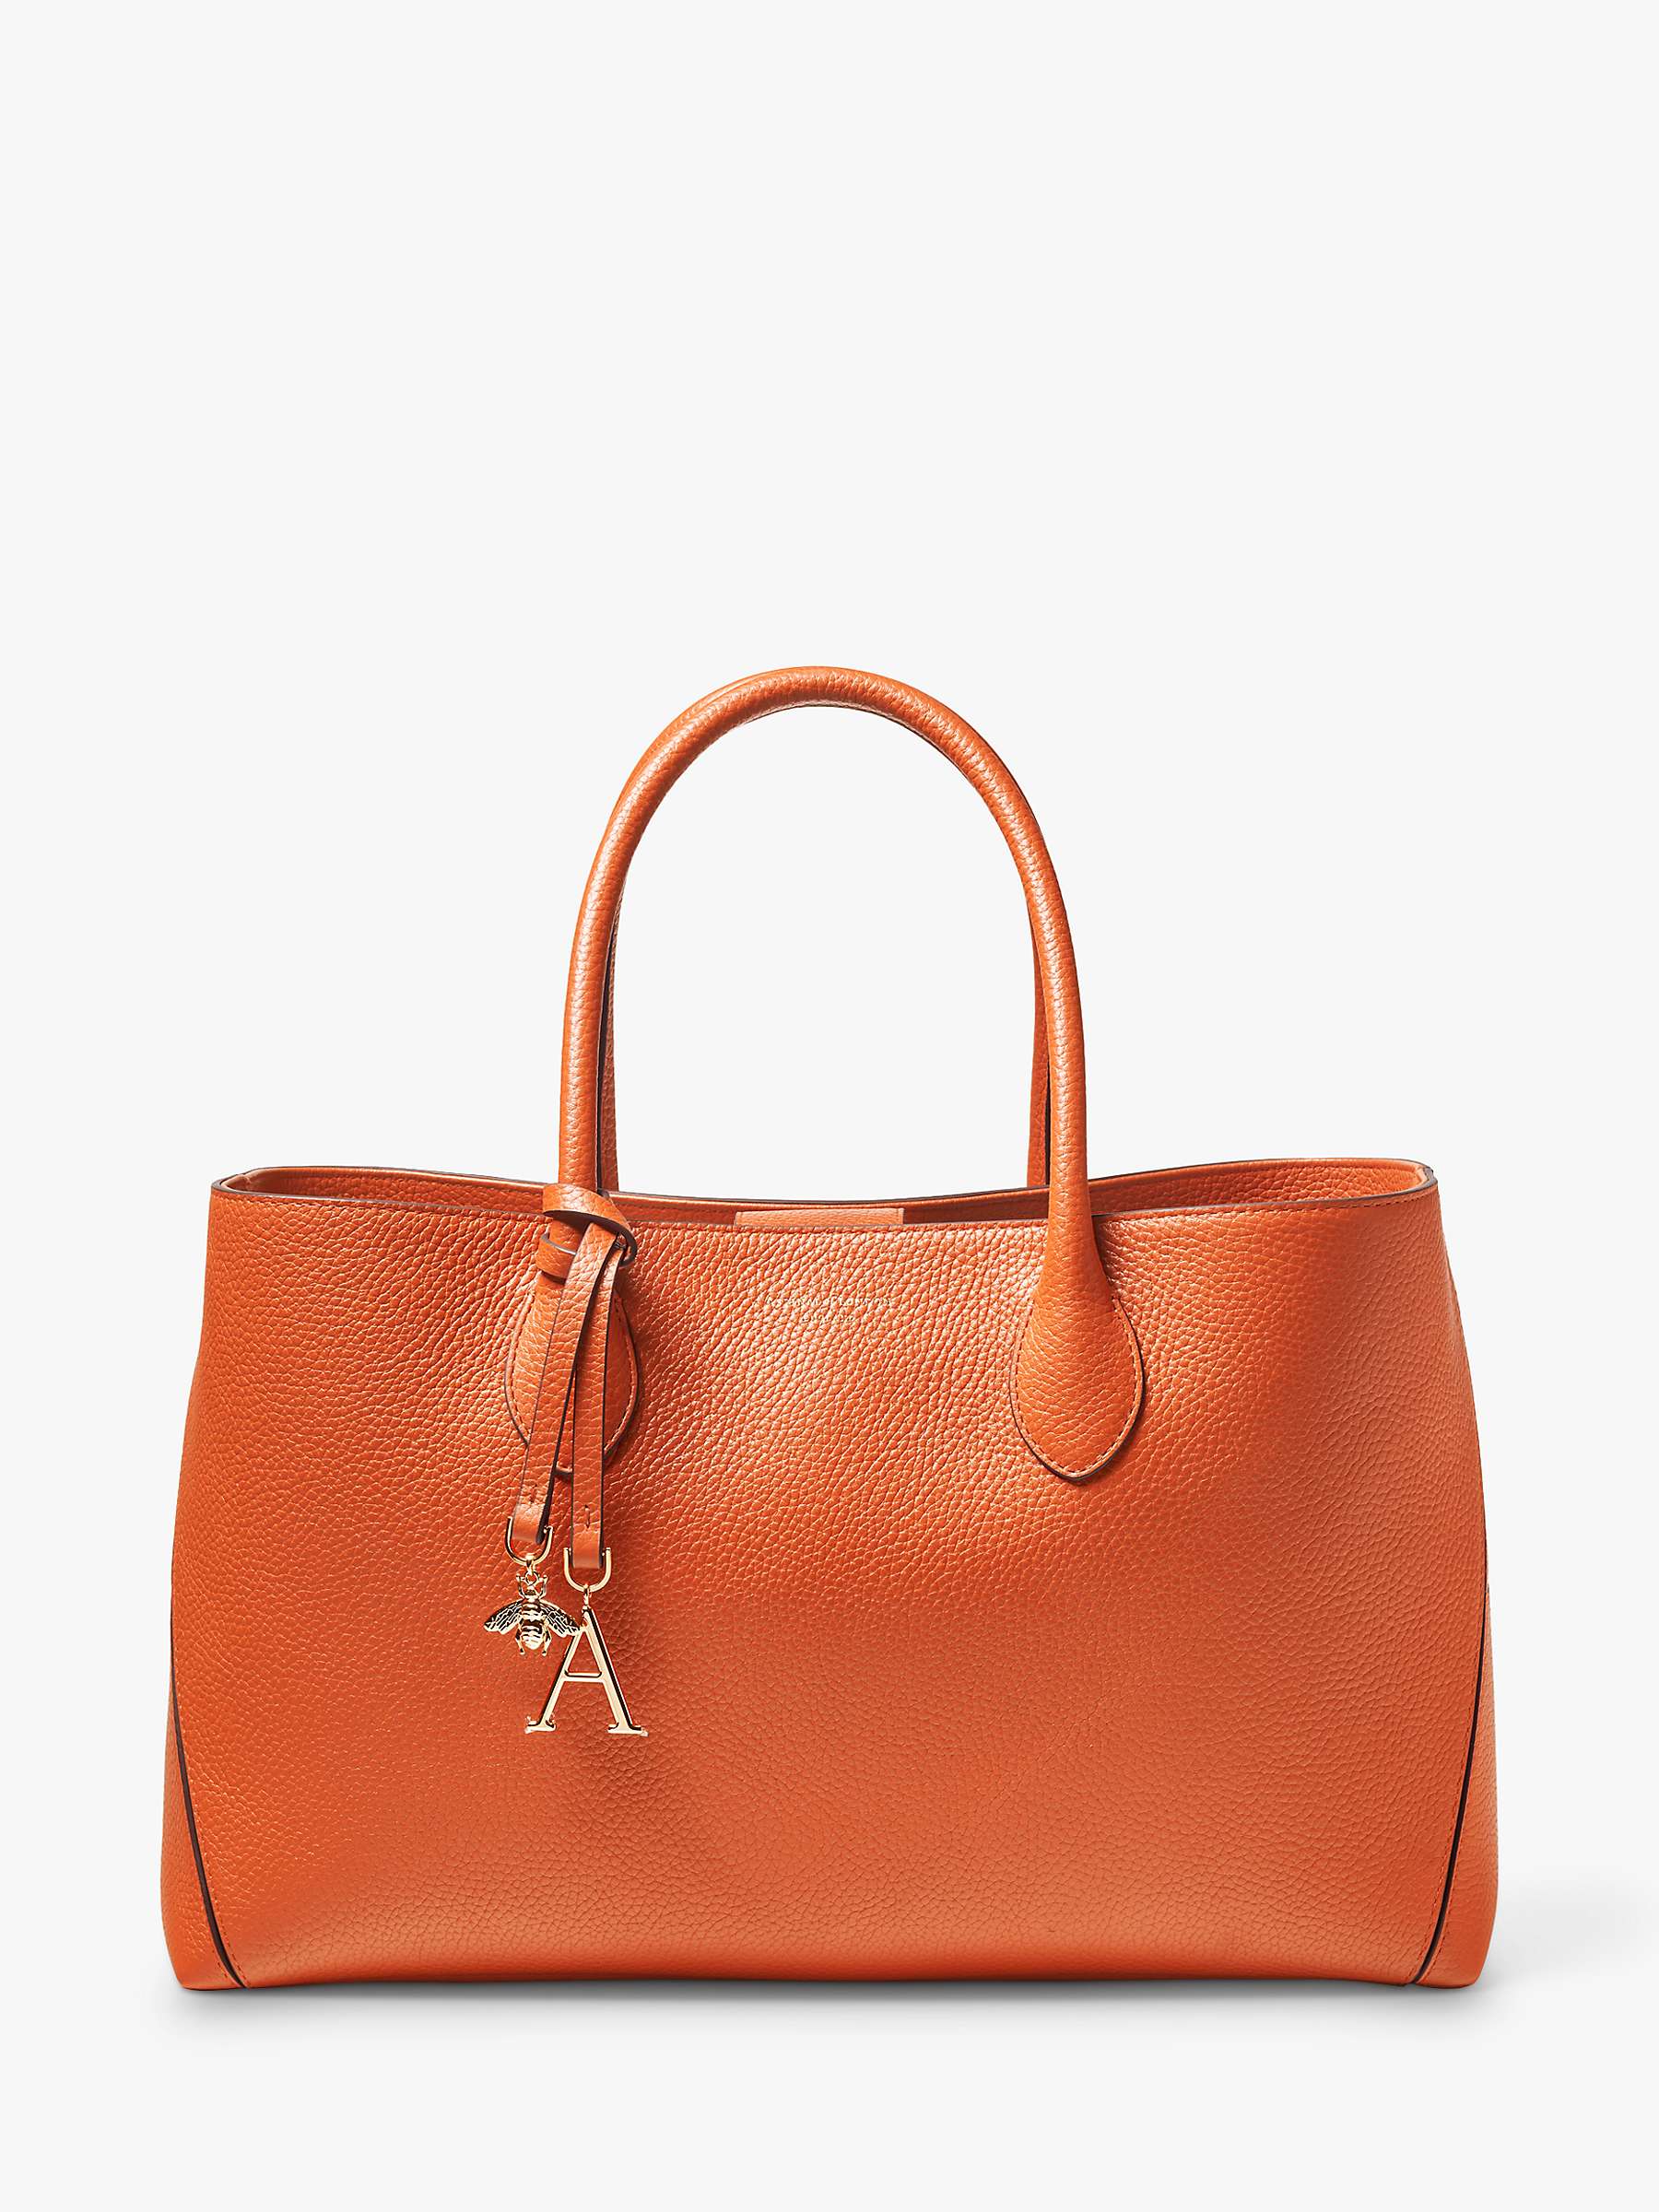 Buy Aspinal of London Pebble Leather London Tote Bag Online at johnlewis.com